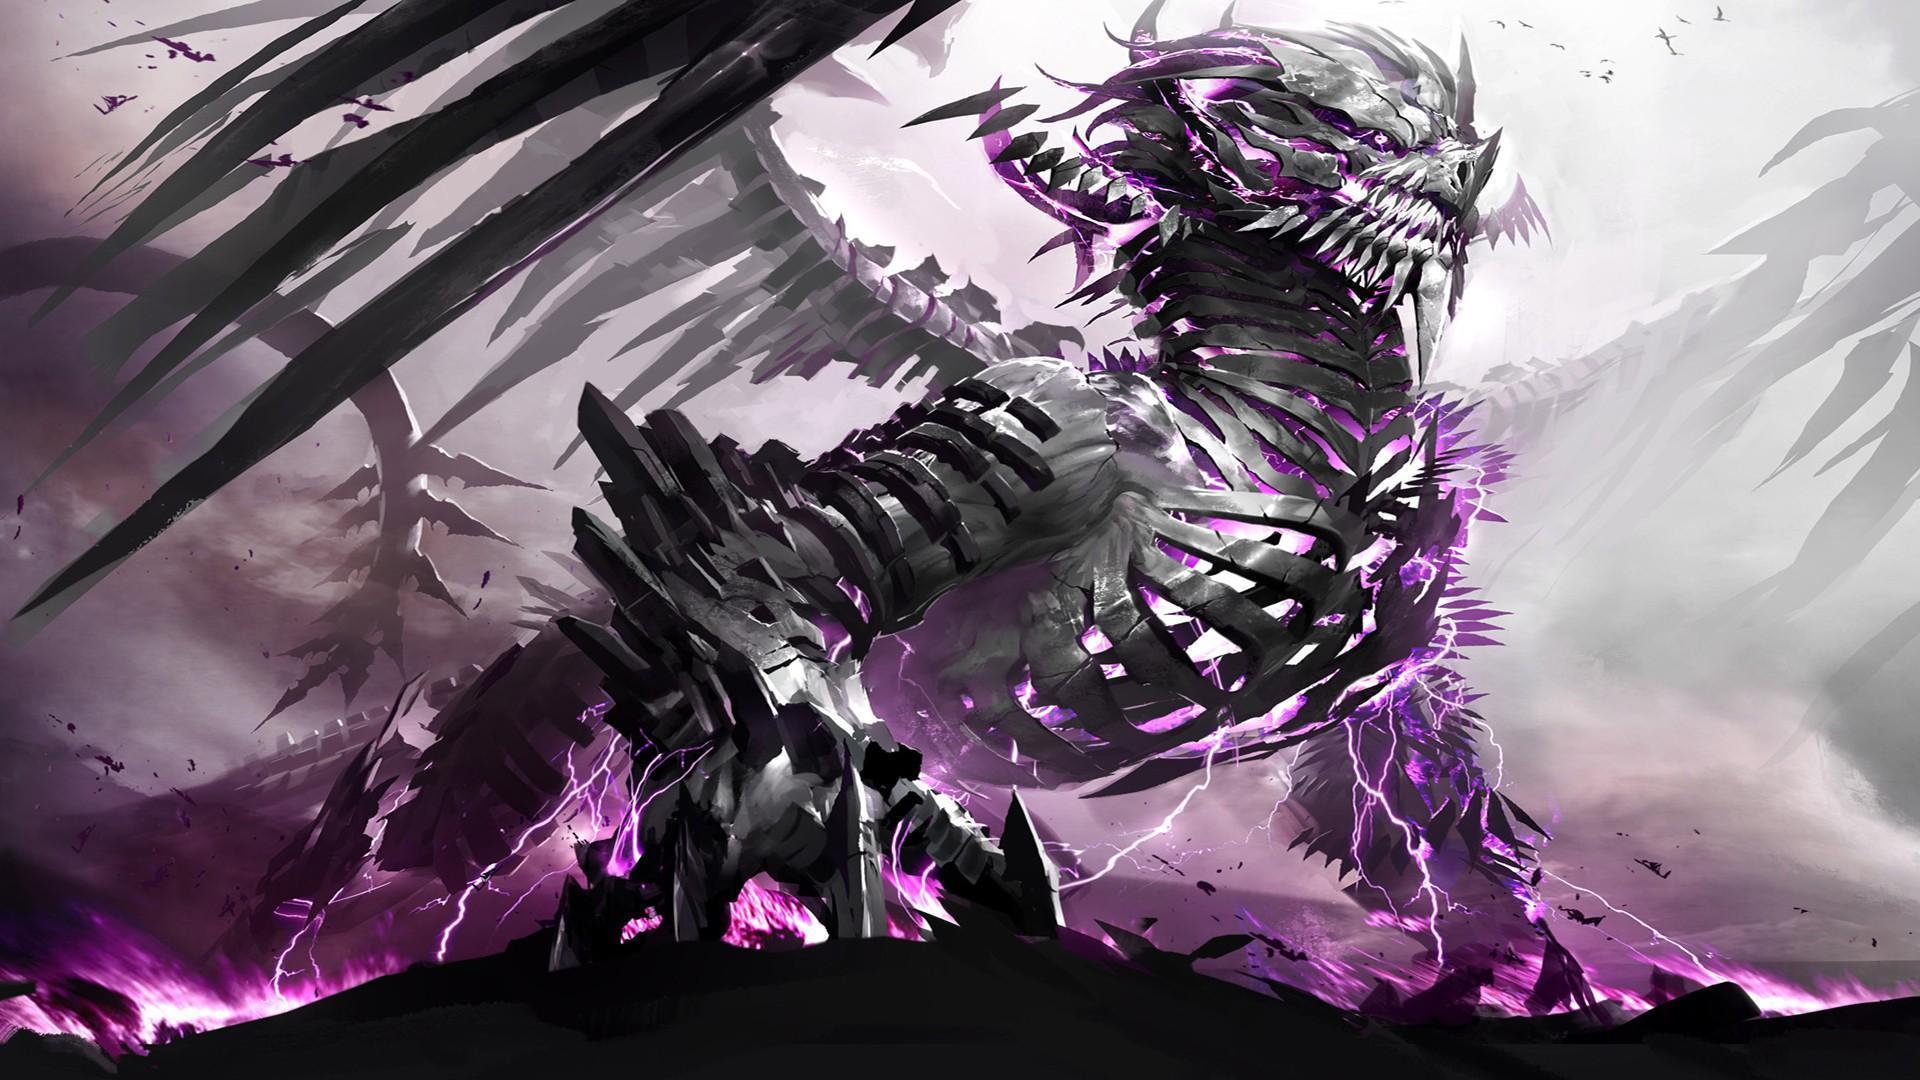 image For > Epic Dragon Wallpaper 1920x1080